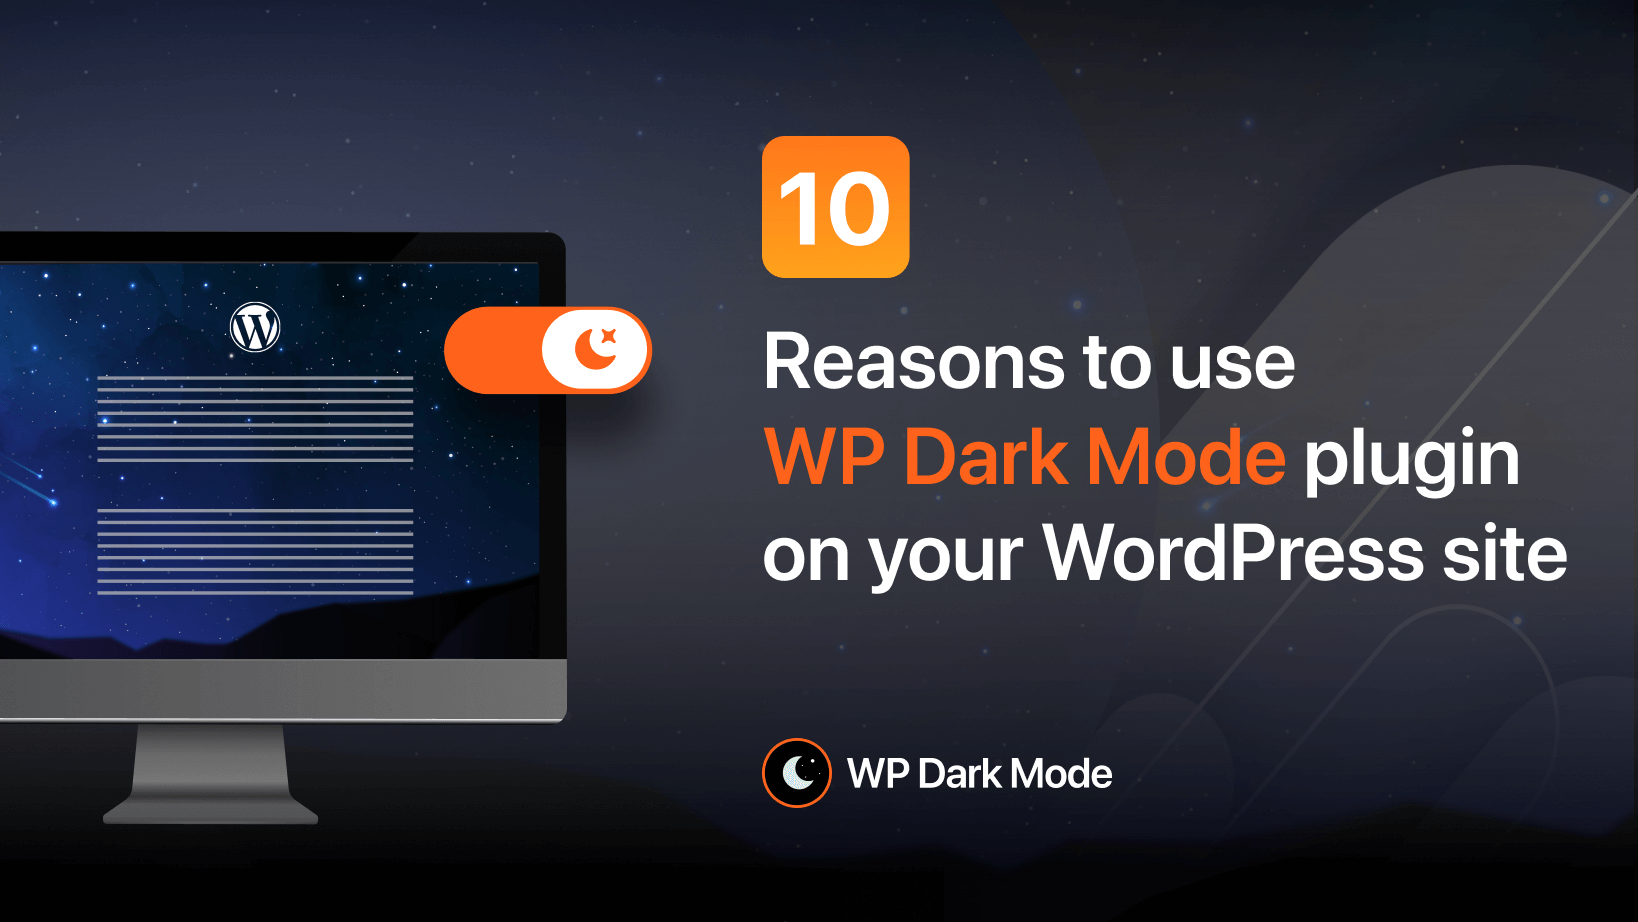 10 reasons to use a night mode plugin on your WordPress site